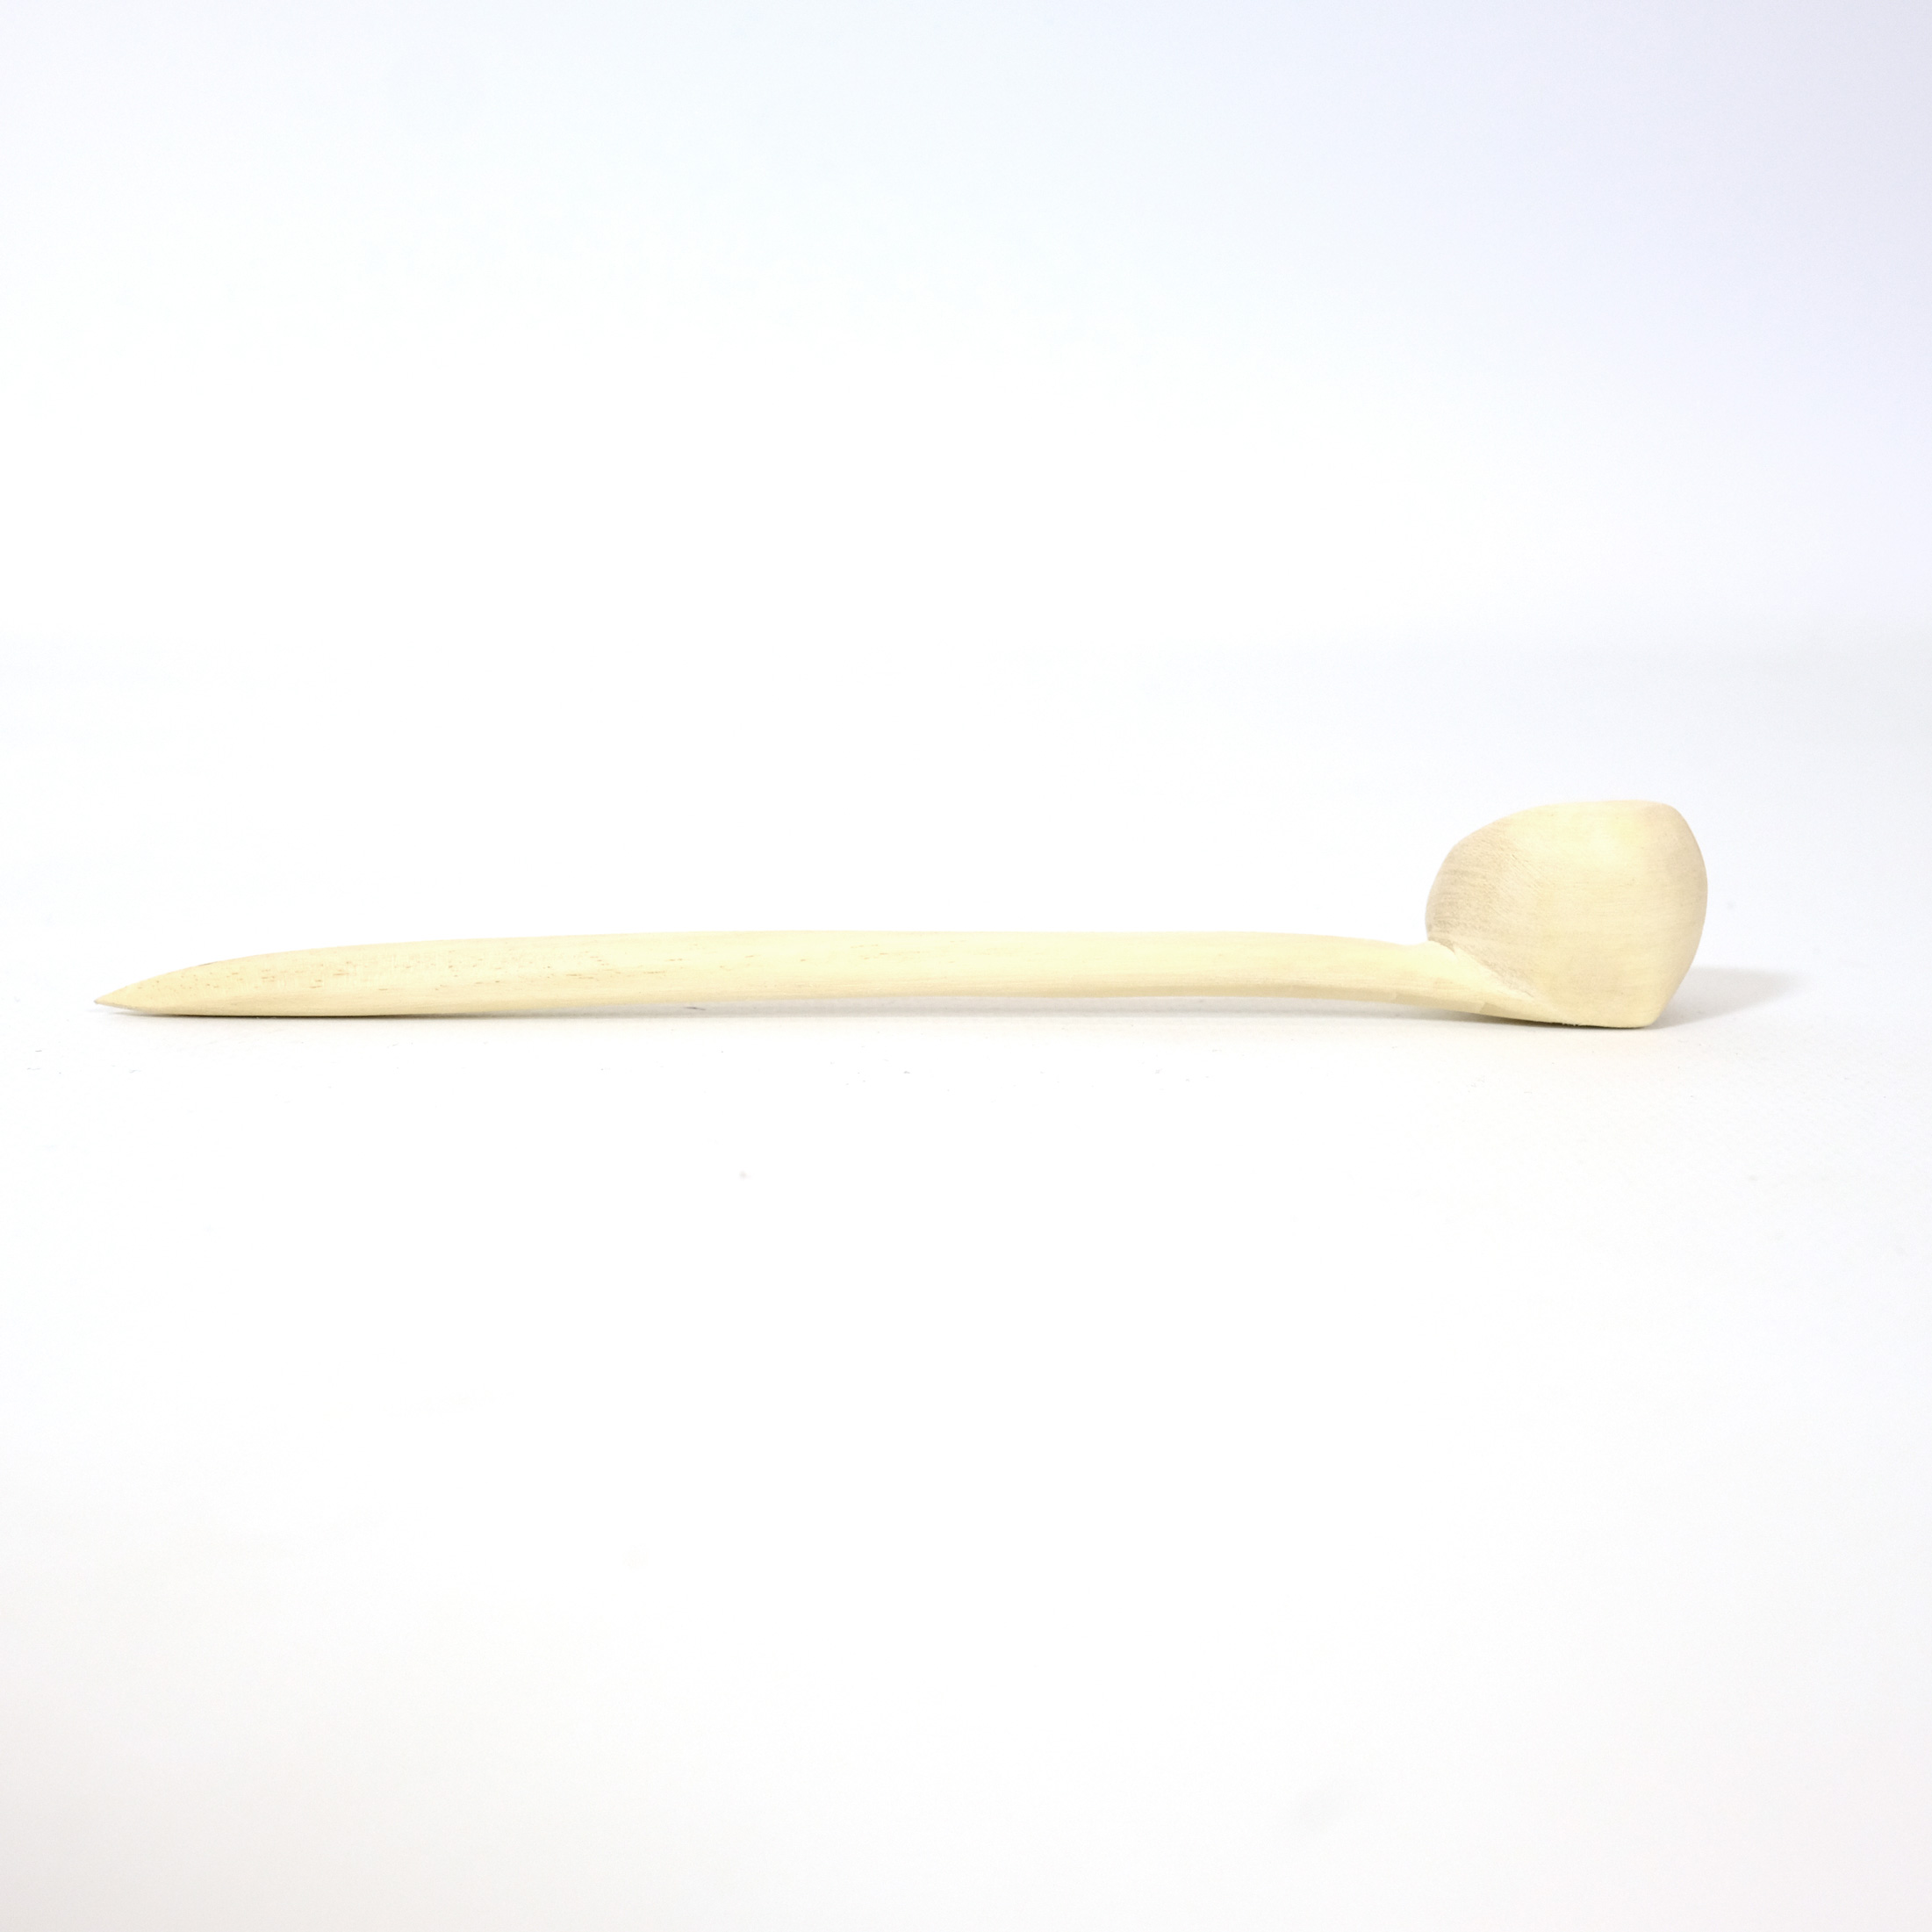 Wooden spoon from Morocco.